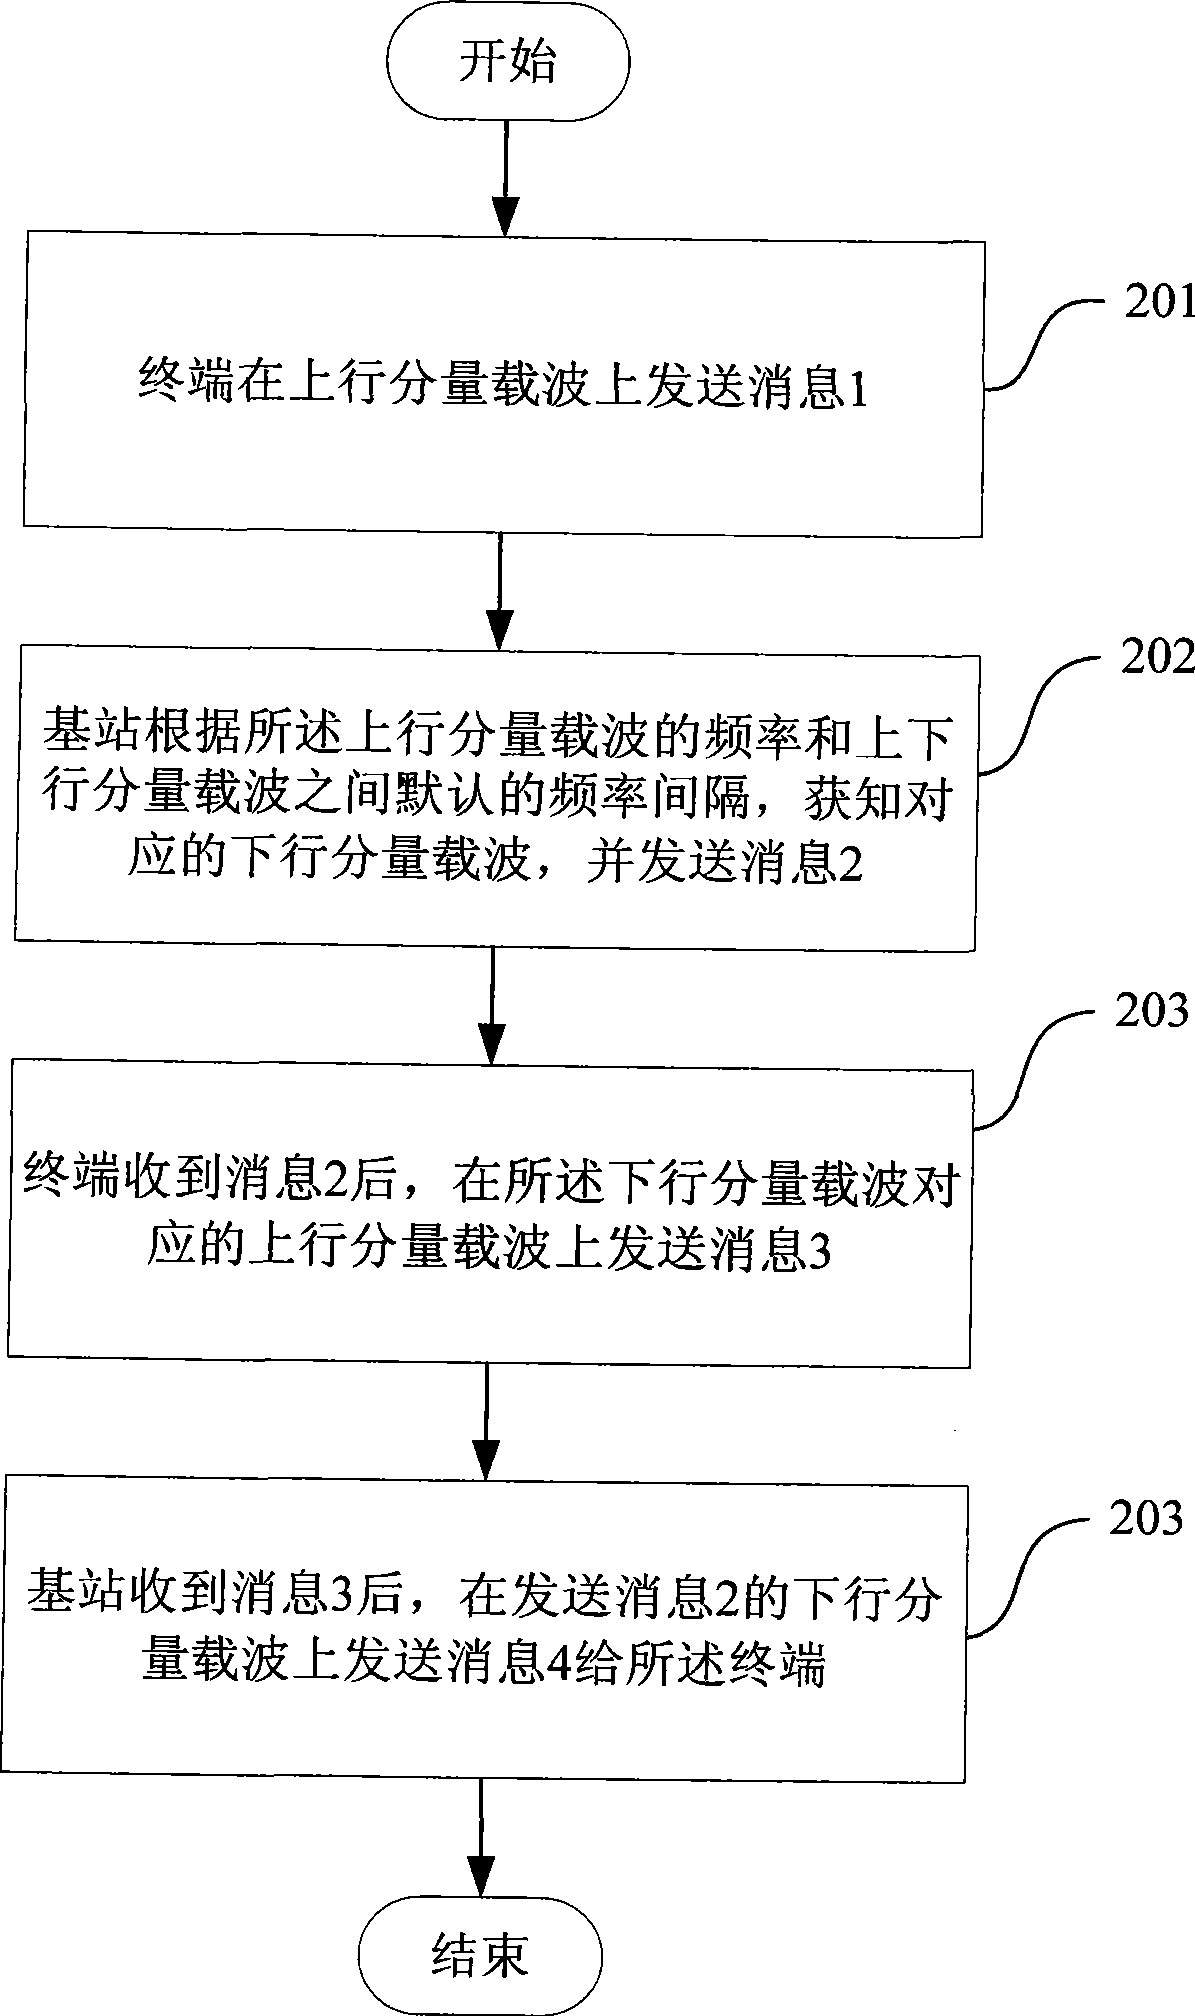 Method and system for multi-carrier stochastic access